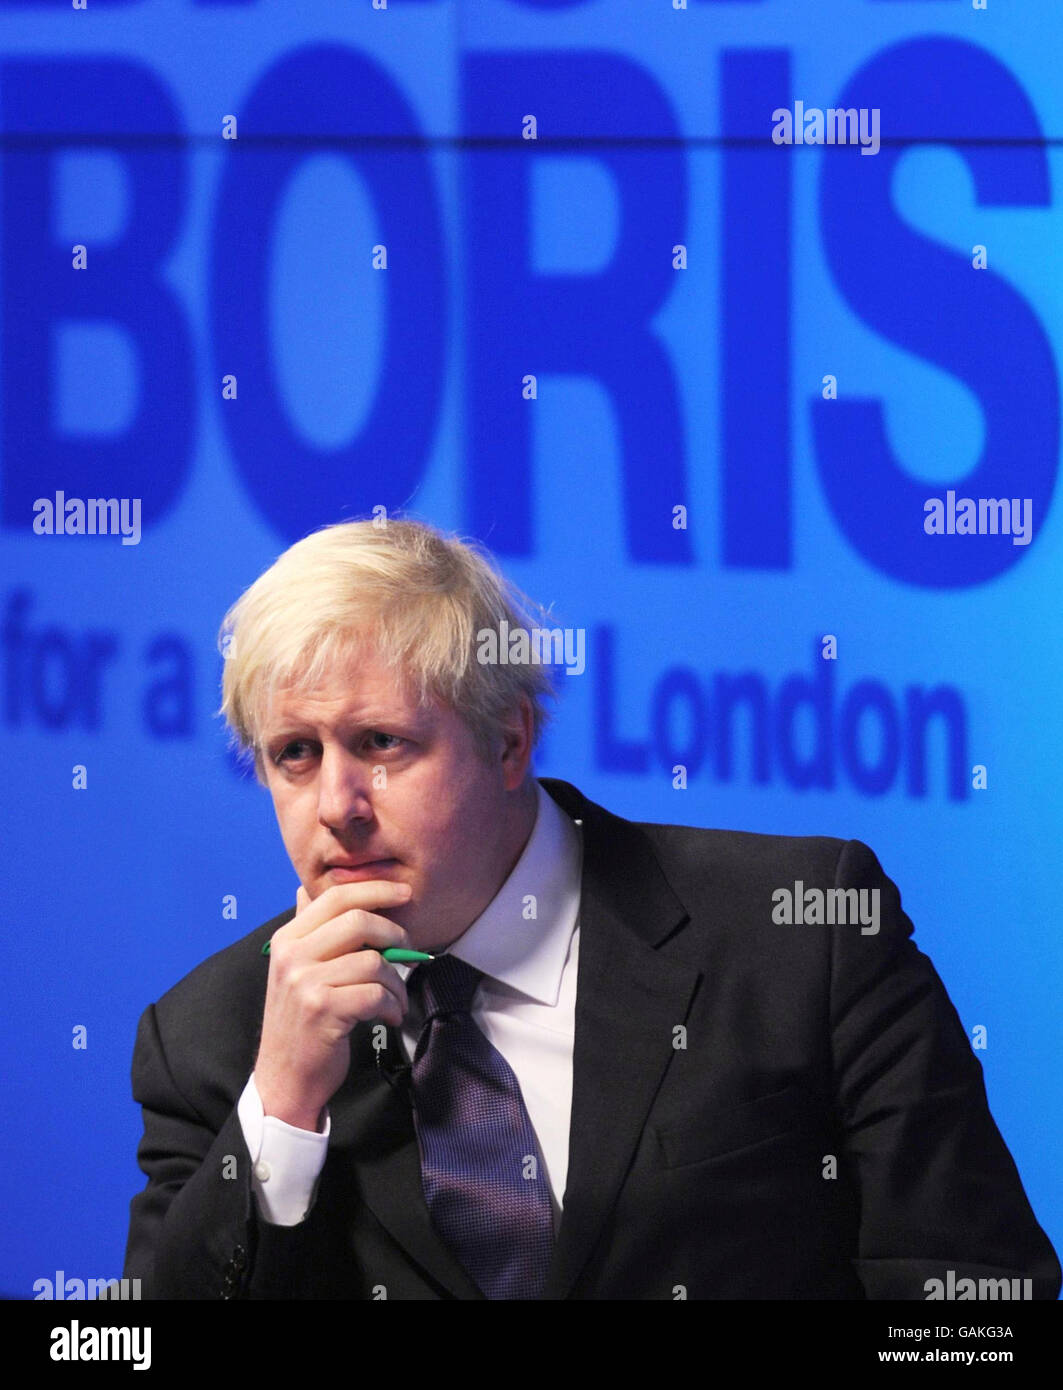 Conservative candidate for London Mayor Boris Johnson prepares to make a speech on the economy of London at Bloomberg's offices in the City of London, ahead of this week's budget. Stock Photo